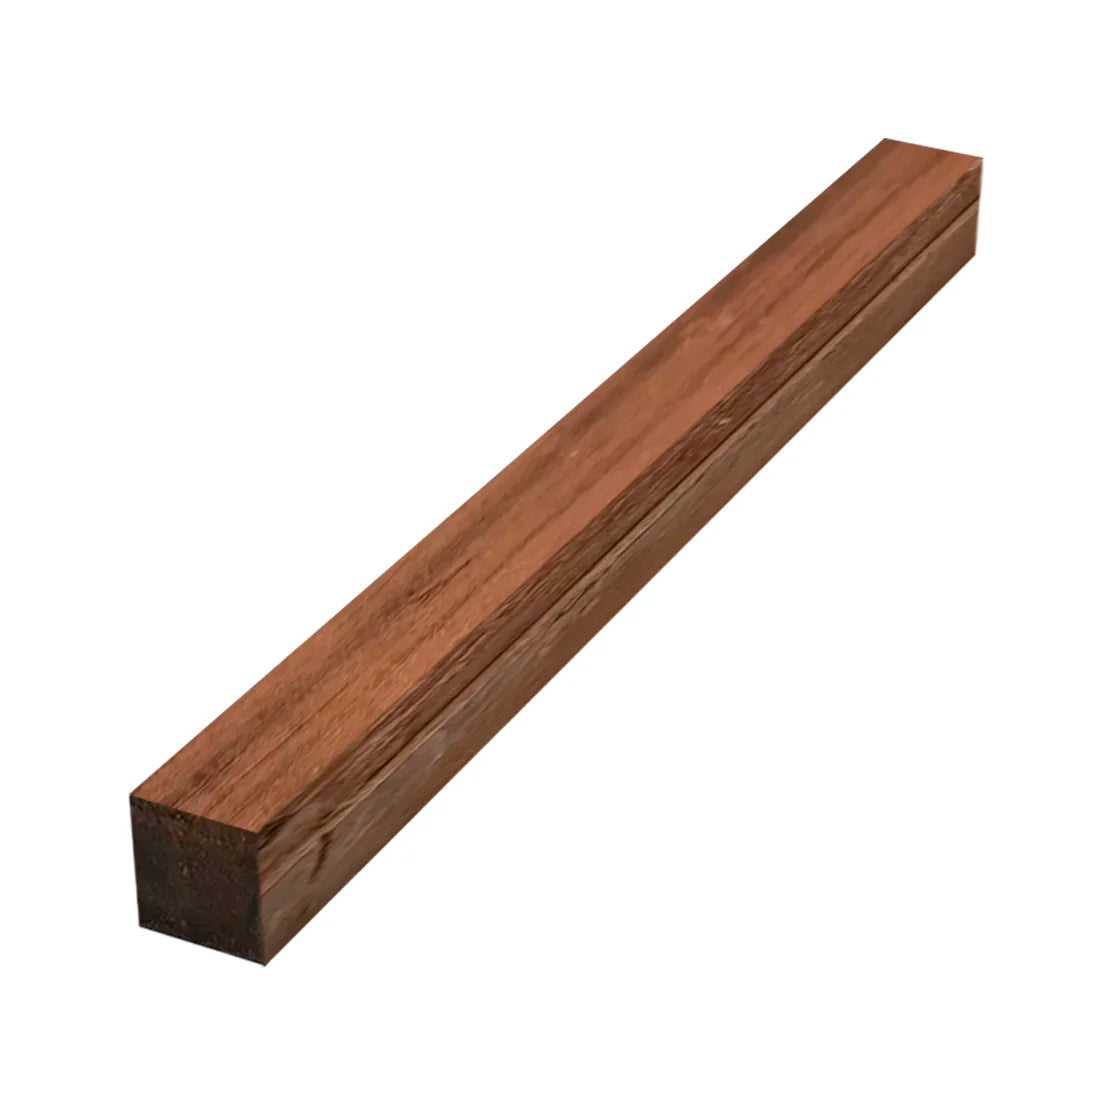 Indian Rosewood Hobby Wood/ Turning Wood Blanks 1 x 1 x 12 inches - Exotic Wood Zone - Buy online Across USA